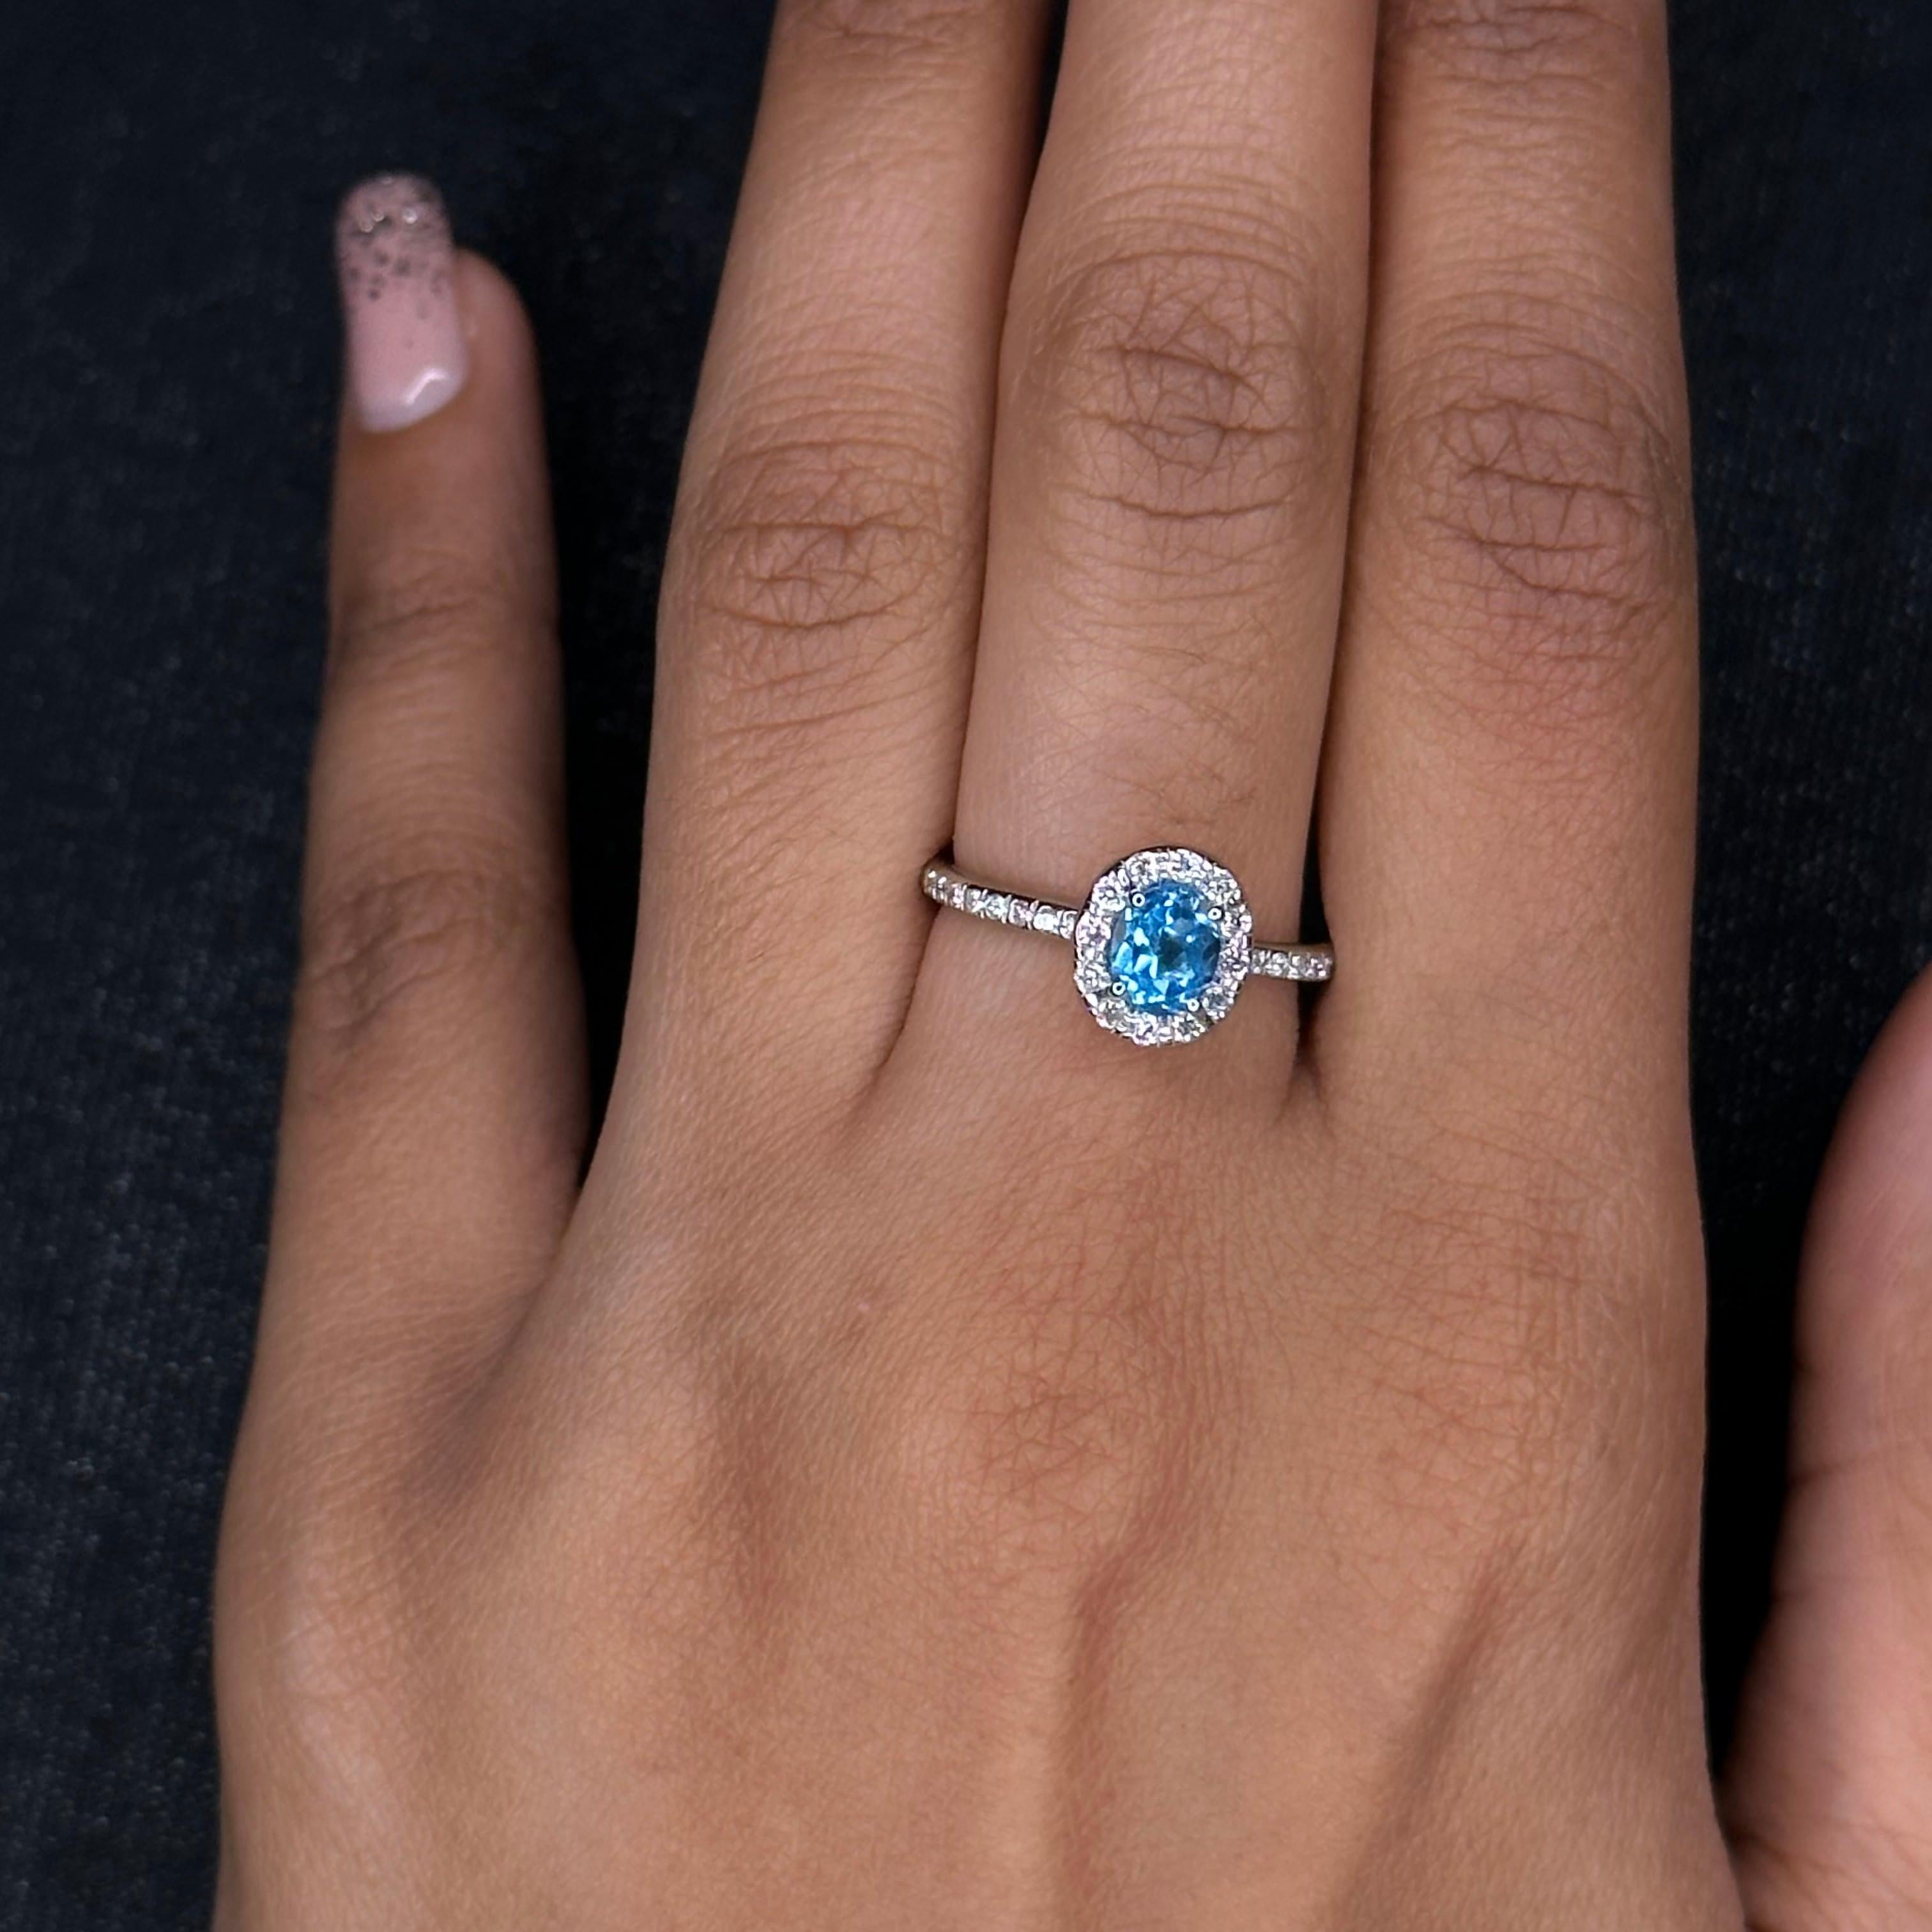 For Sale:  Real 14kt Solid White Gold Halo Diamond And Oval Cut Blue Topaz Ring For Her 9